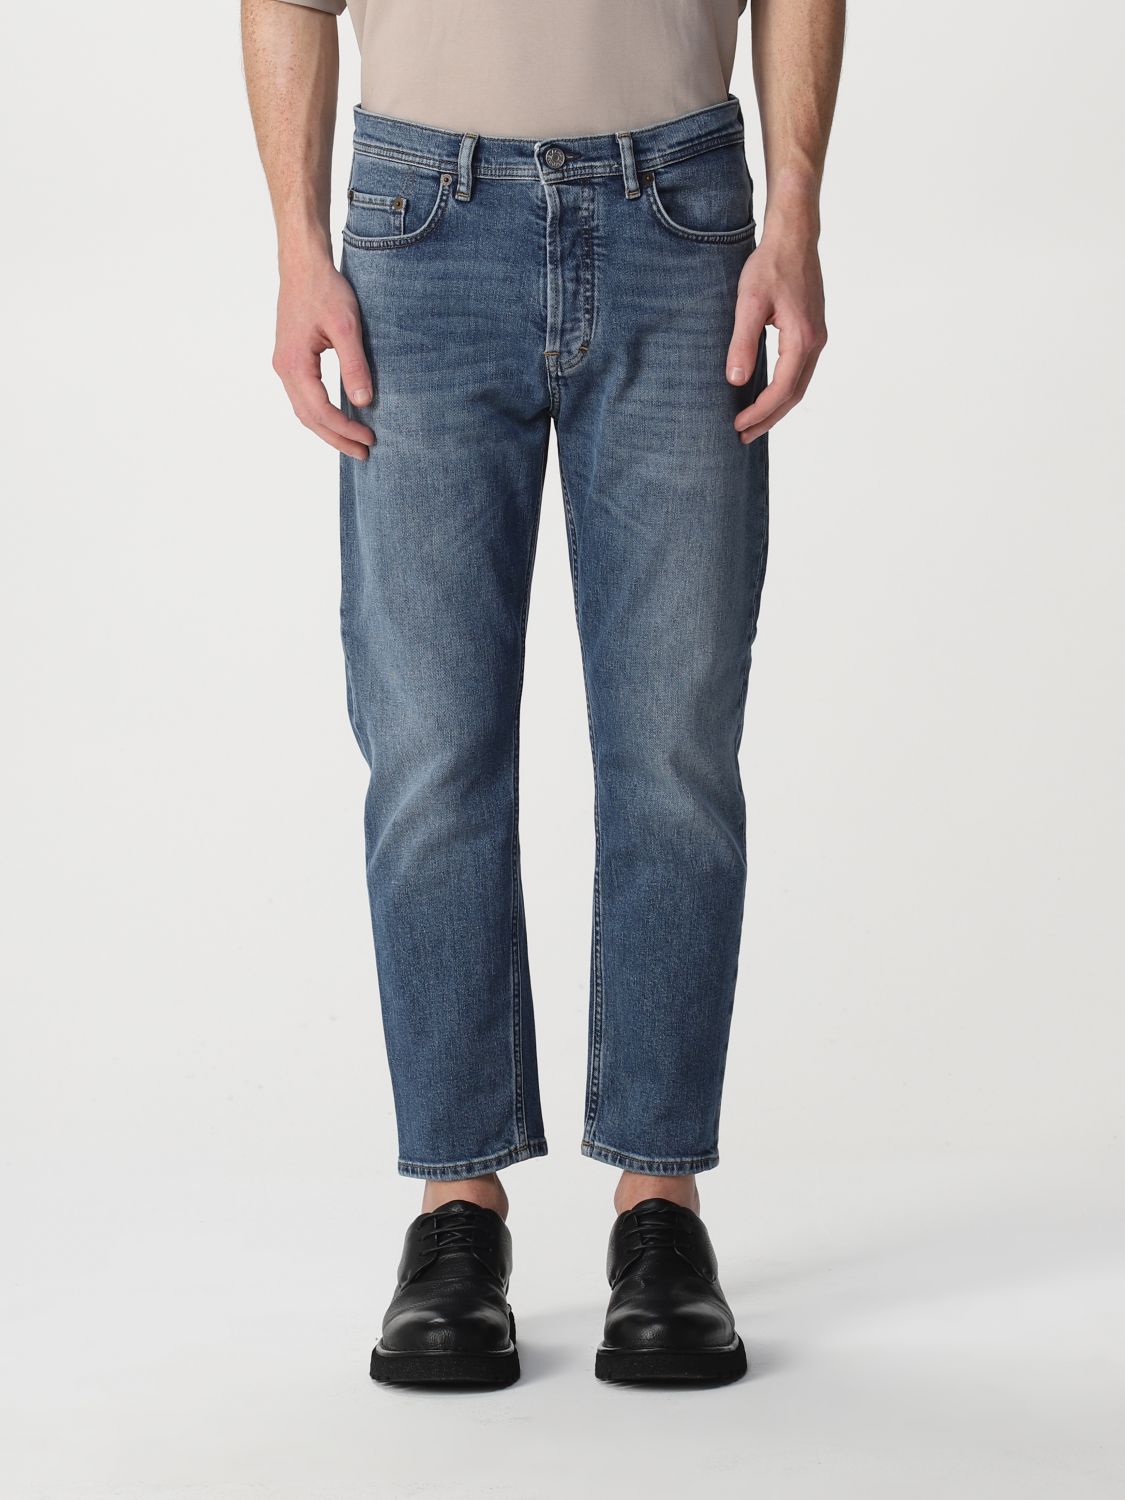 communicatie West karton ACNE STUDIOS: cropped jeans in washed denim - Blue | Acne Studios jeans  B00174 online on GIGLIO.COM